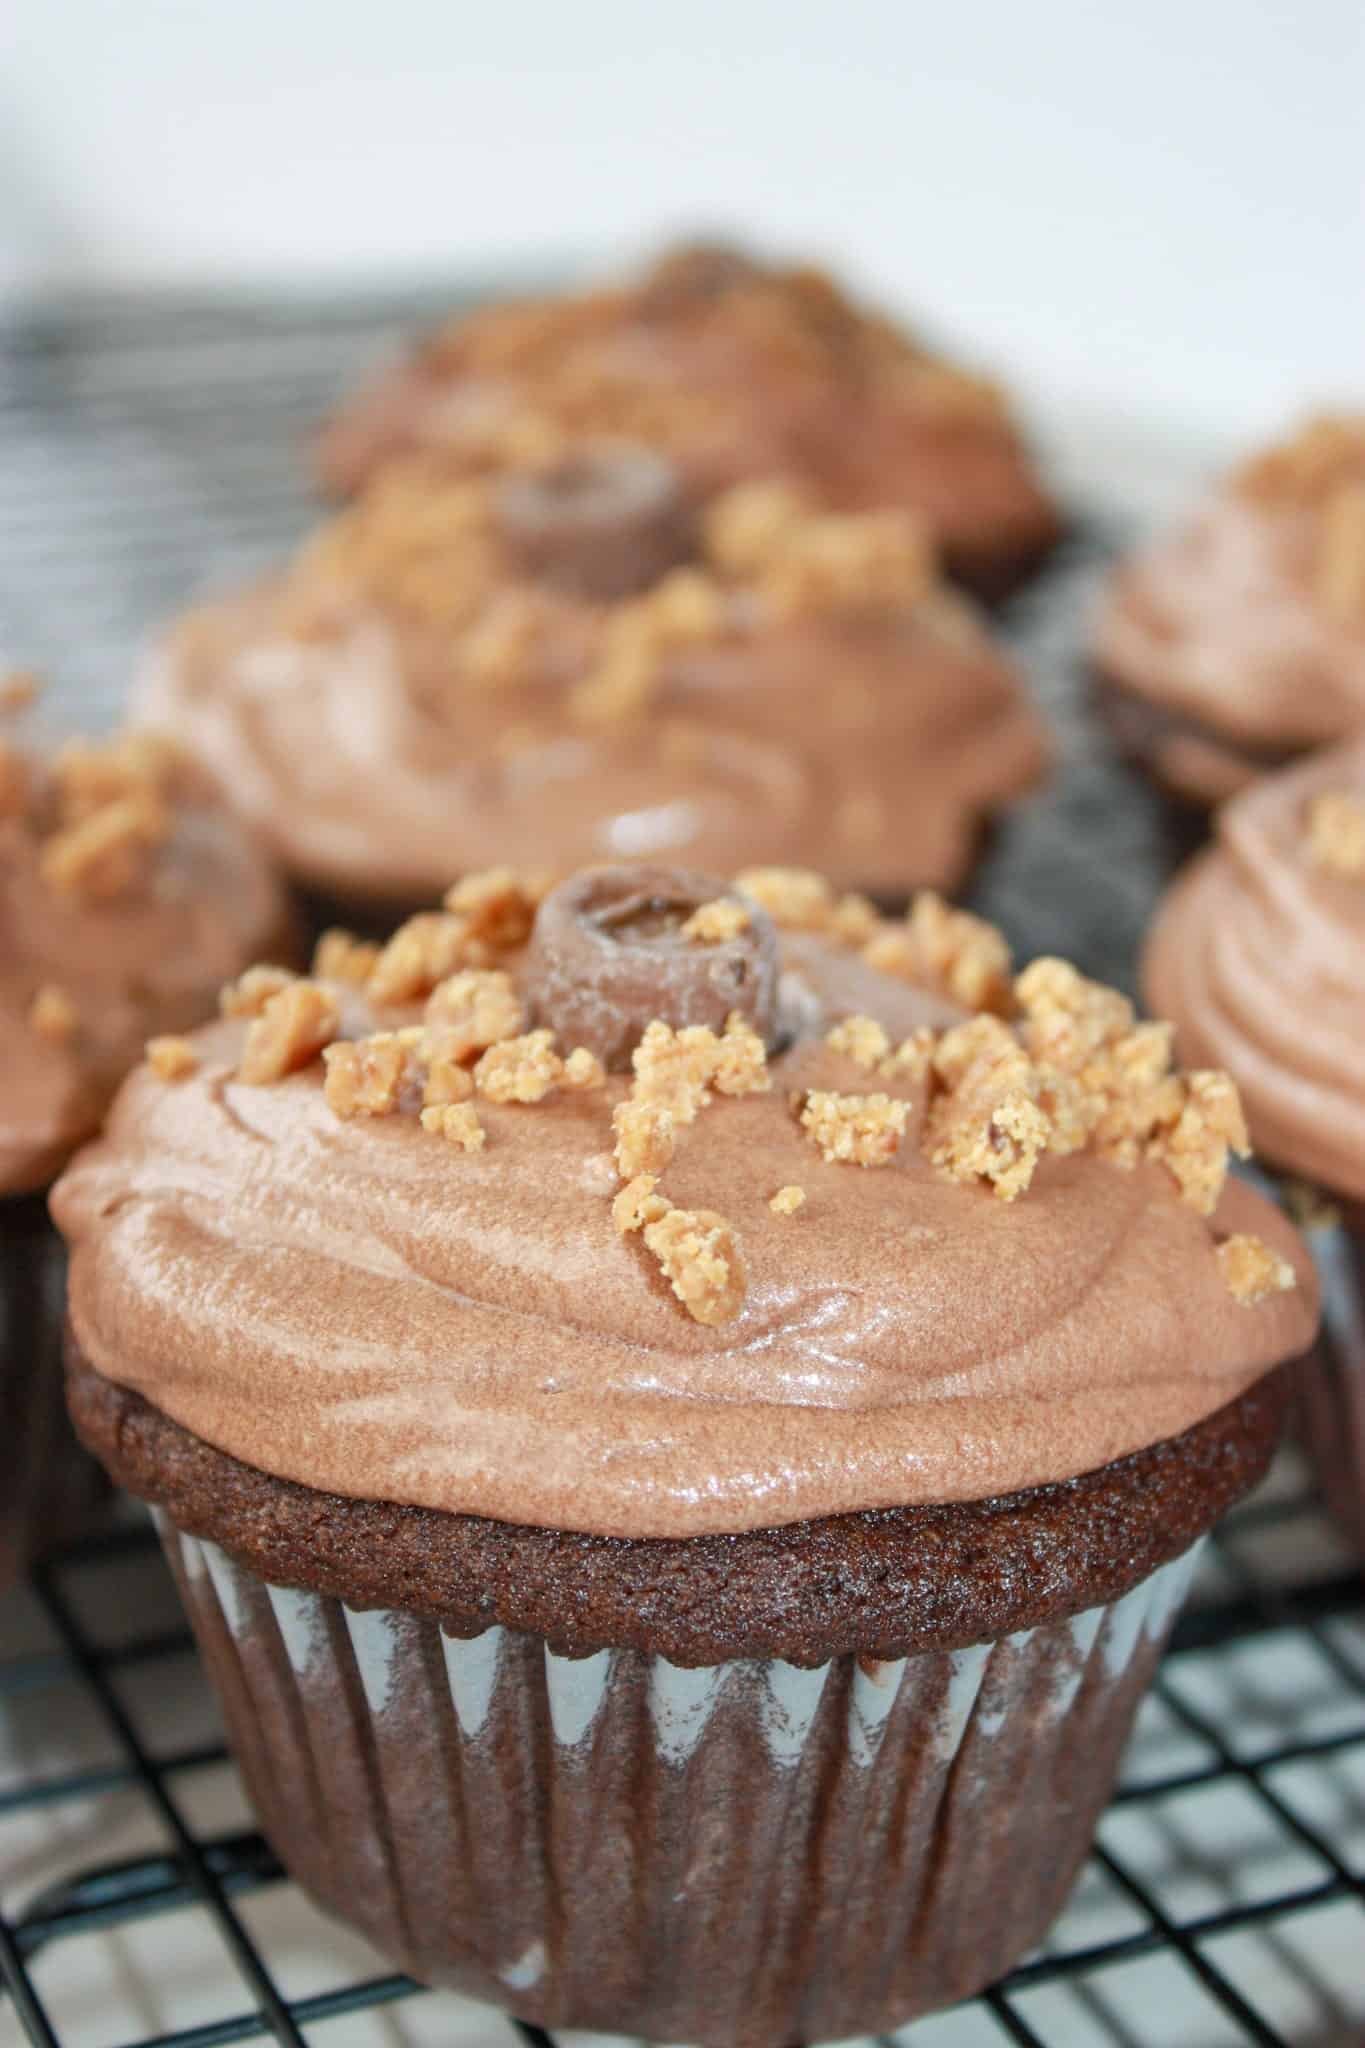 Chocolate Caramel Cupcakes make a light, moist dessert or snack.  This easy, gluten free recipe uses Rollo Candies and Kraft Caramels to create a decadent chocolate caramel treat.